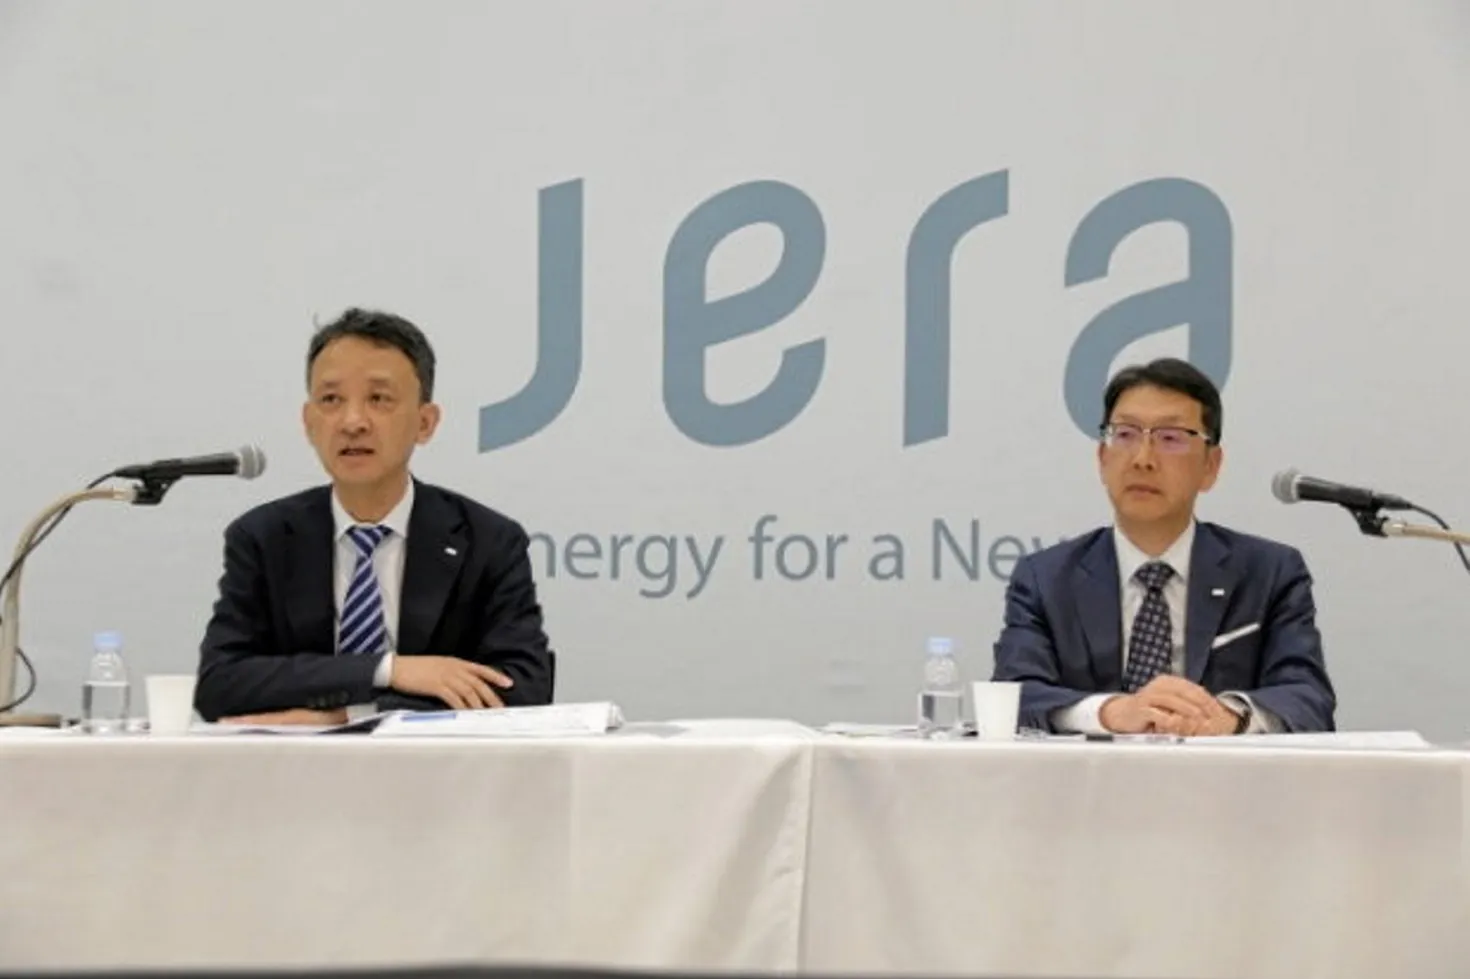 Yukio Kani, global CEO and chair (left), and Hisahide Okuda, president, director, CEO and COO (right) for JERA at a press conference.